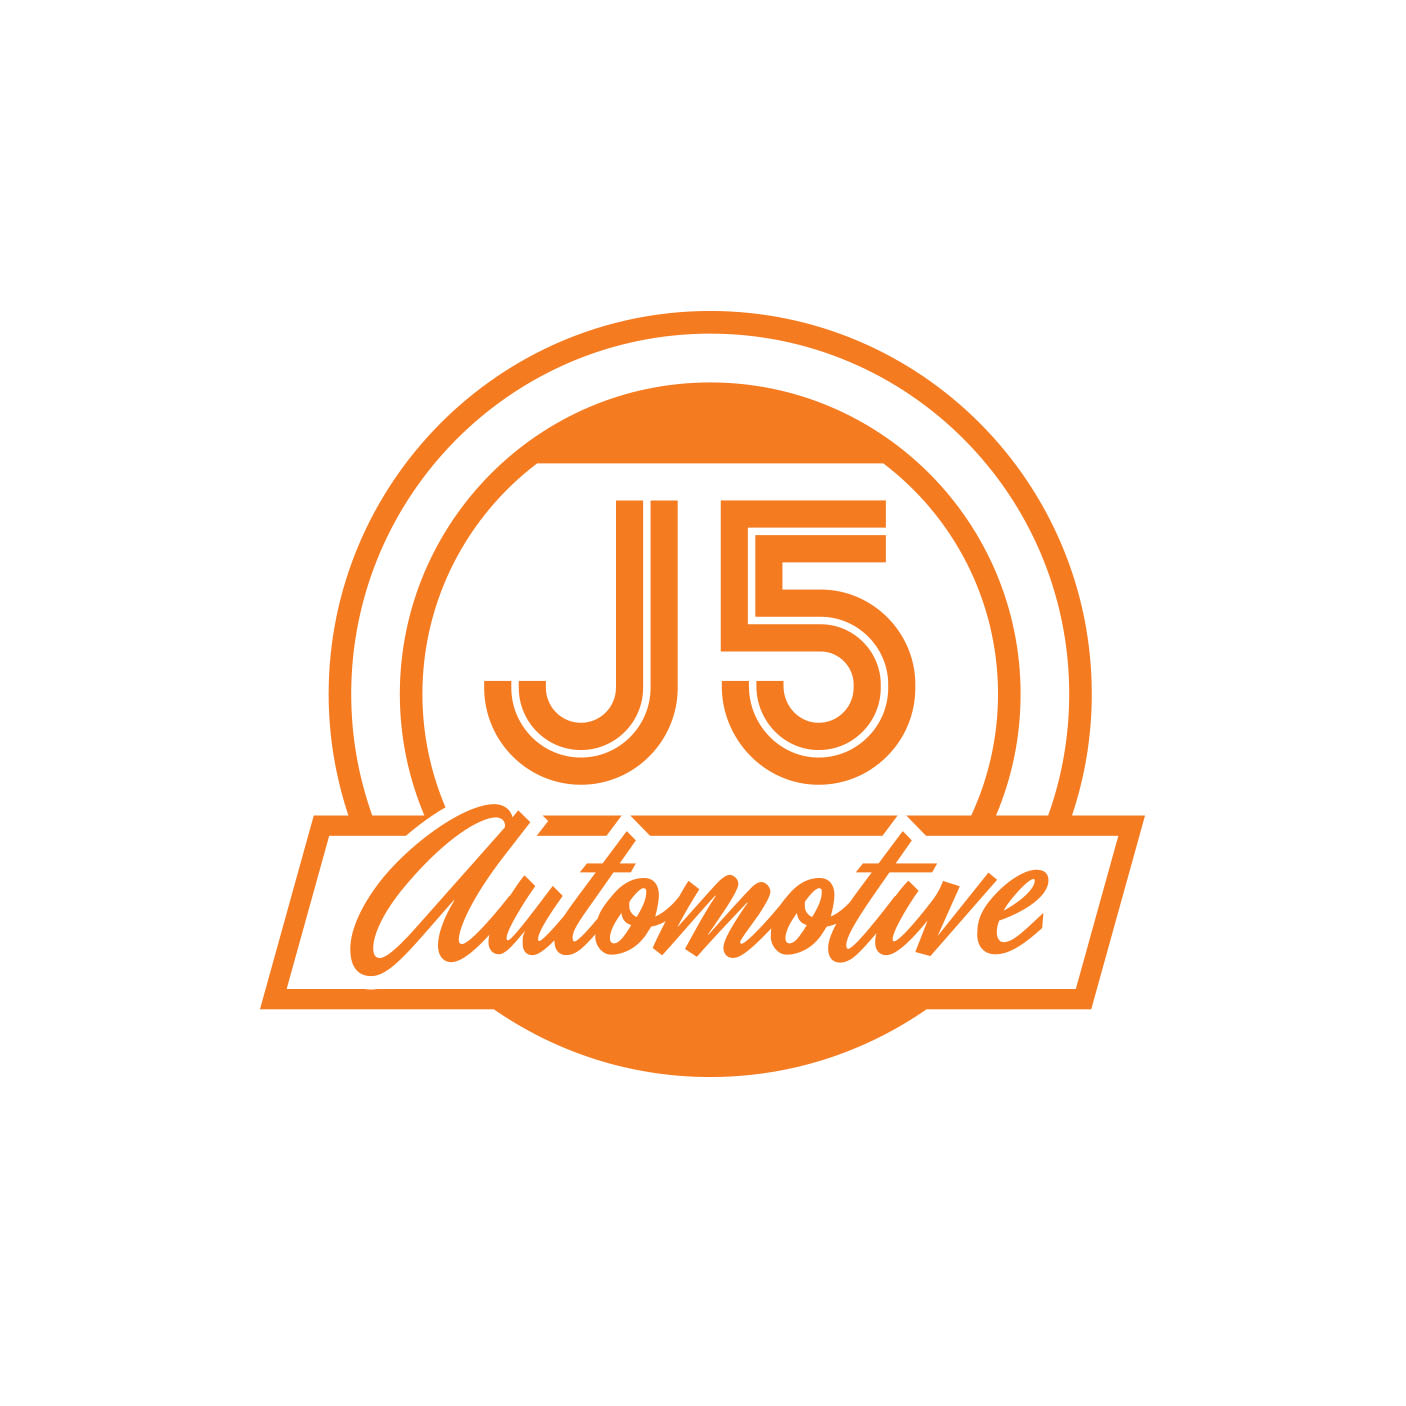 Branding for online truck modification and off roading store J5 Automotive.